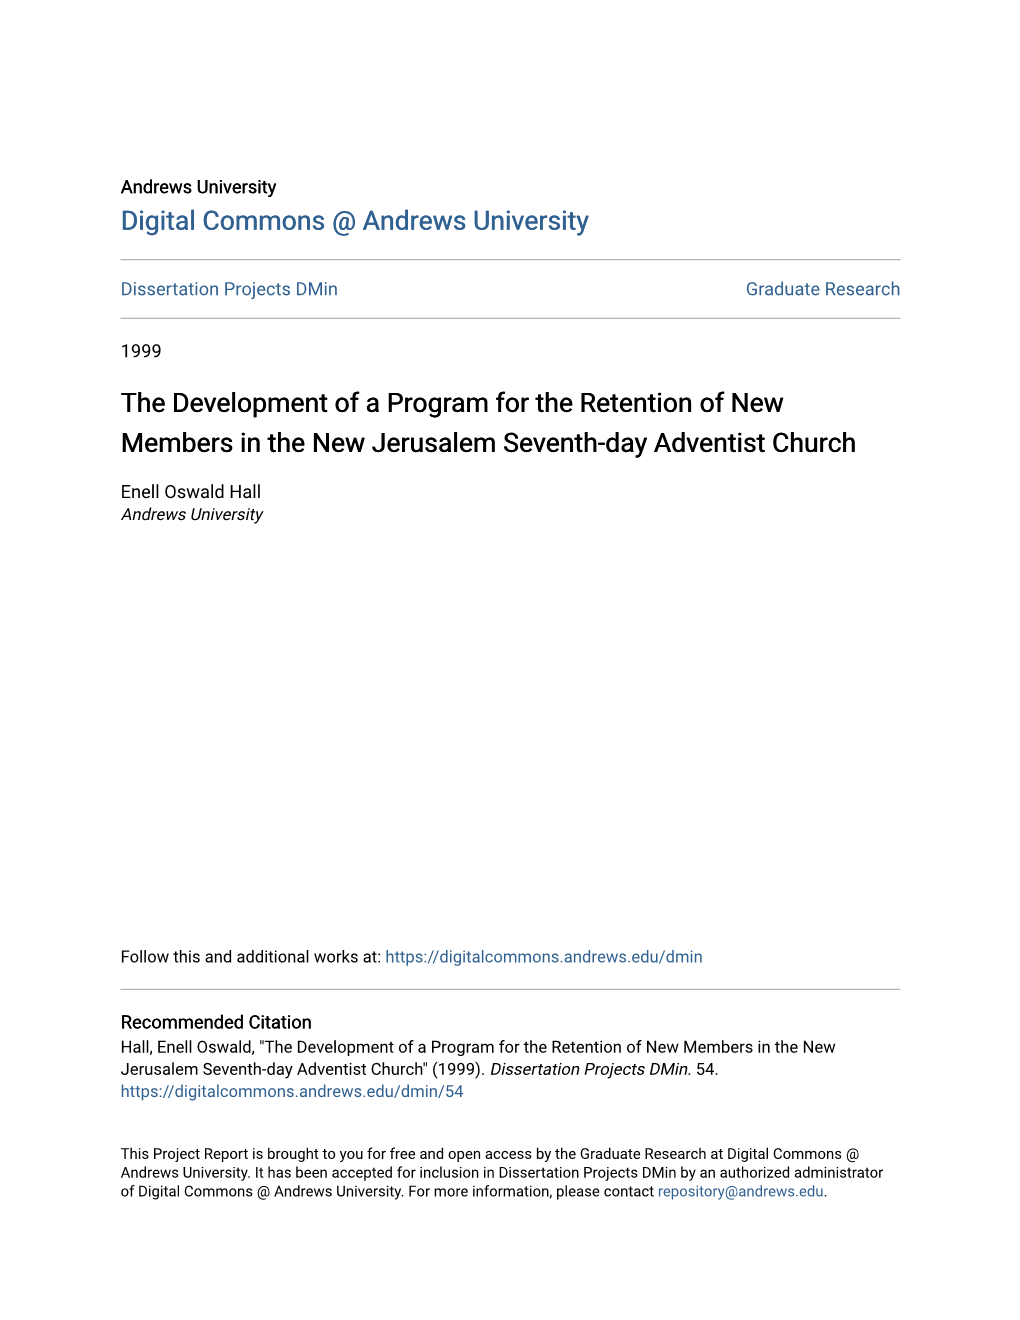 The Development of a Program for the Retention of New Members in the New Jerusalem Seventh-Day Adventist Church